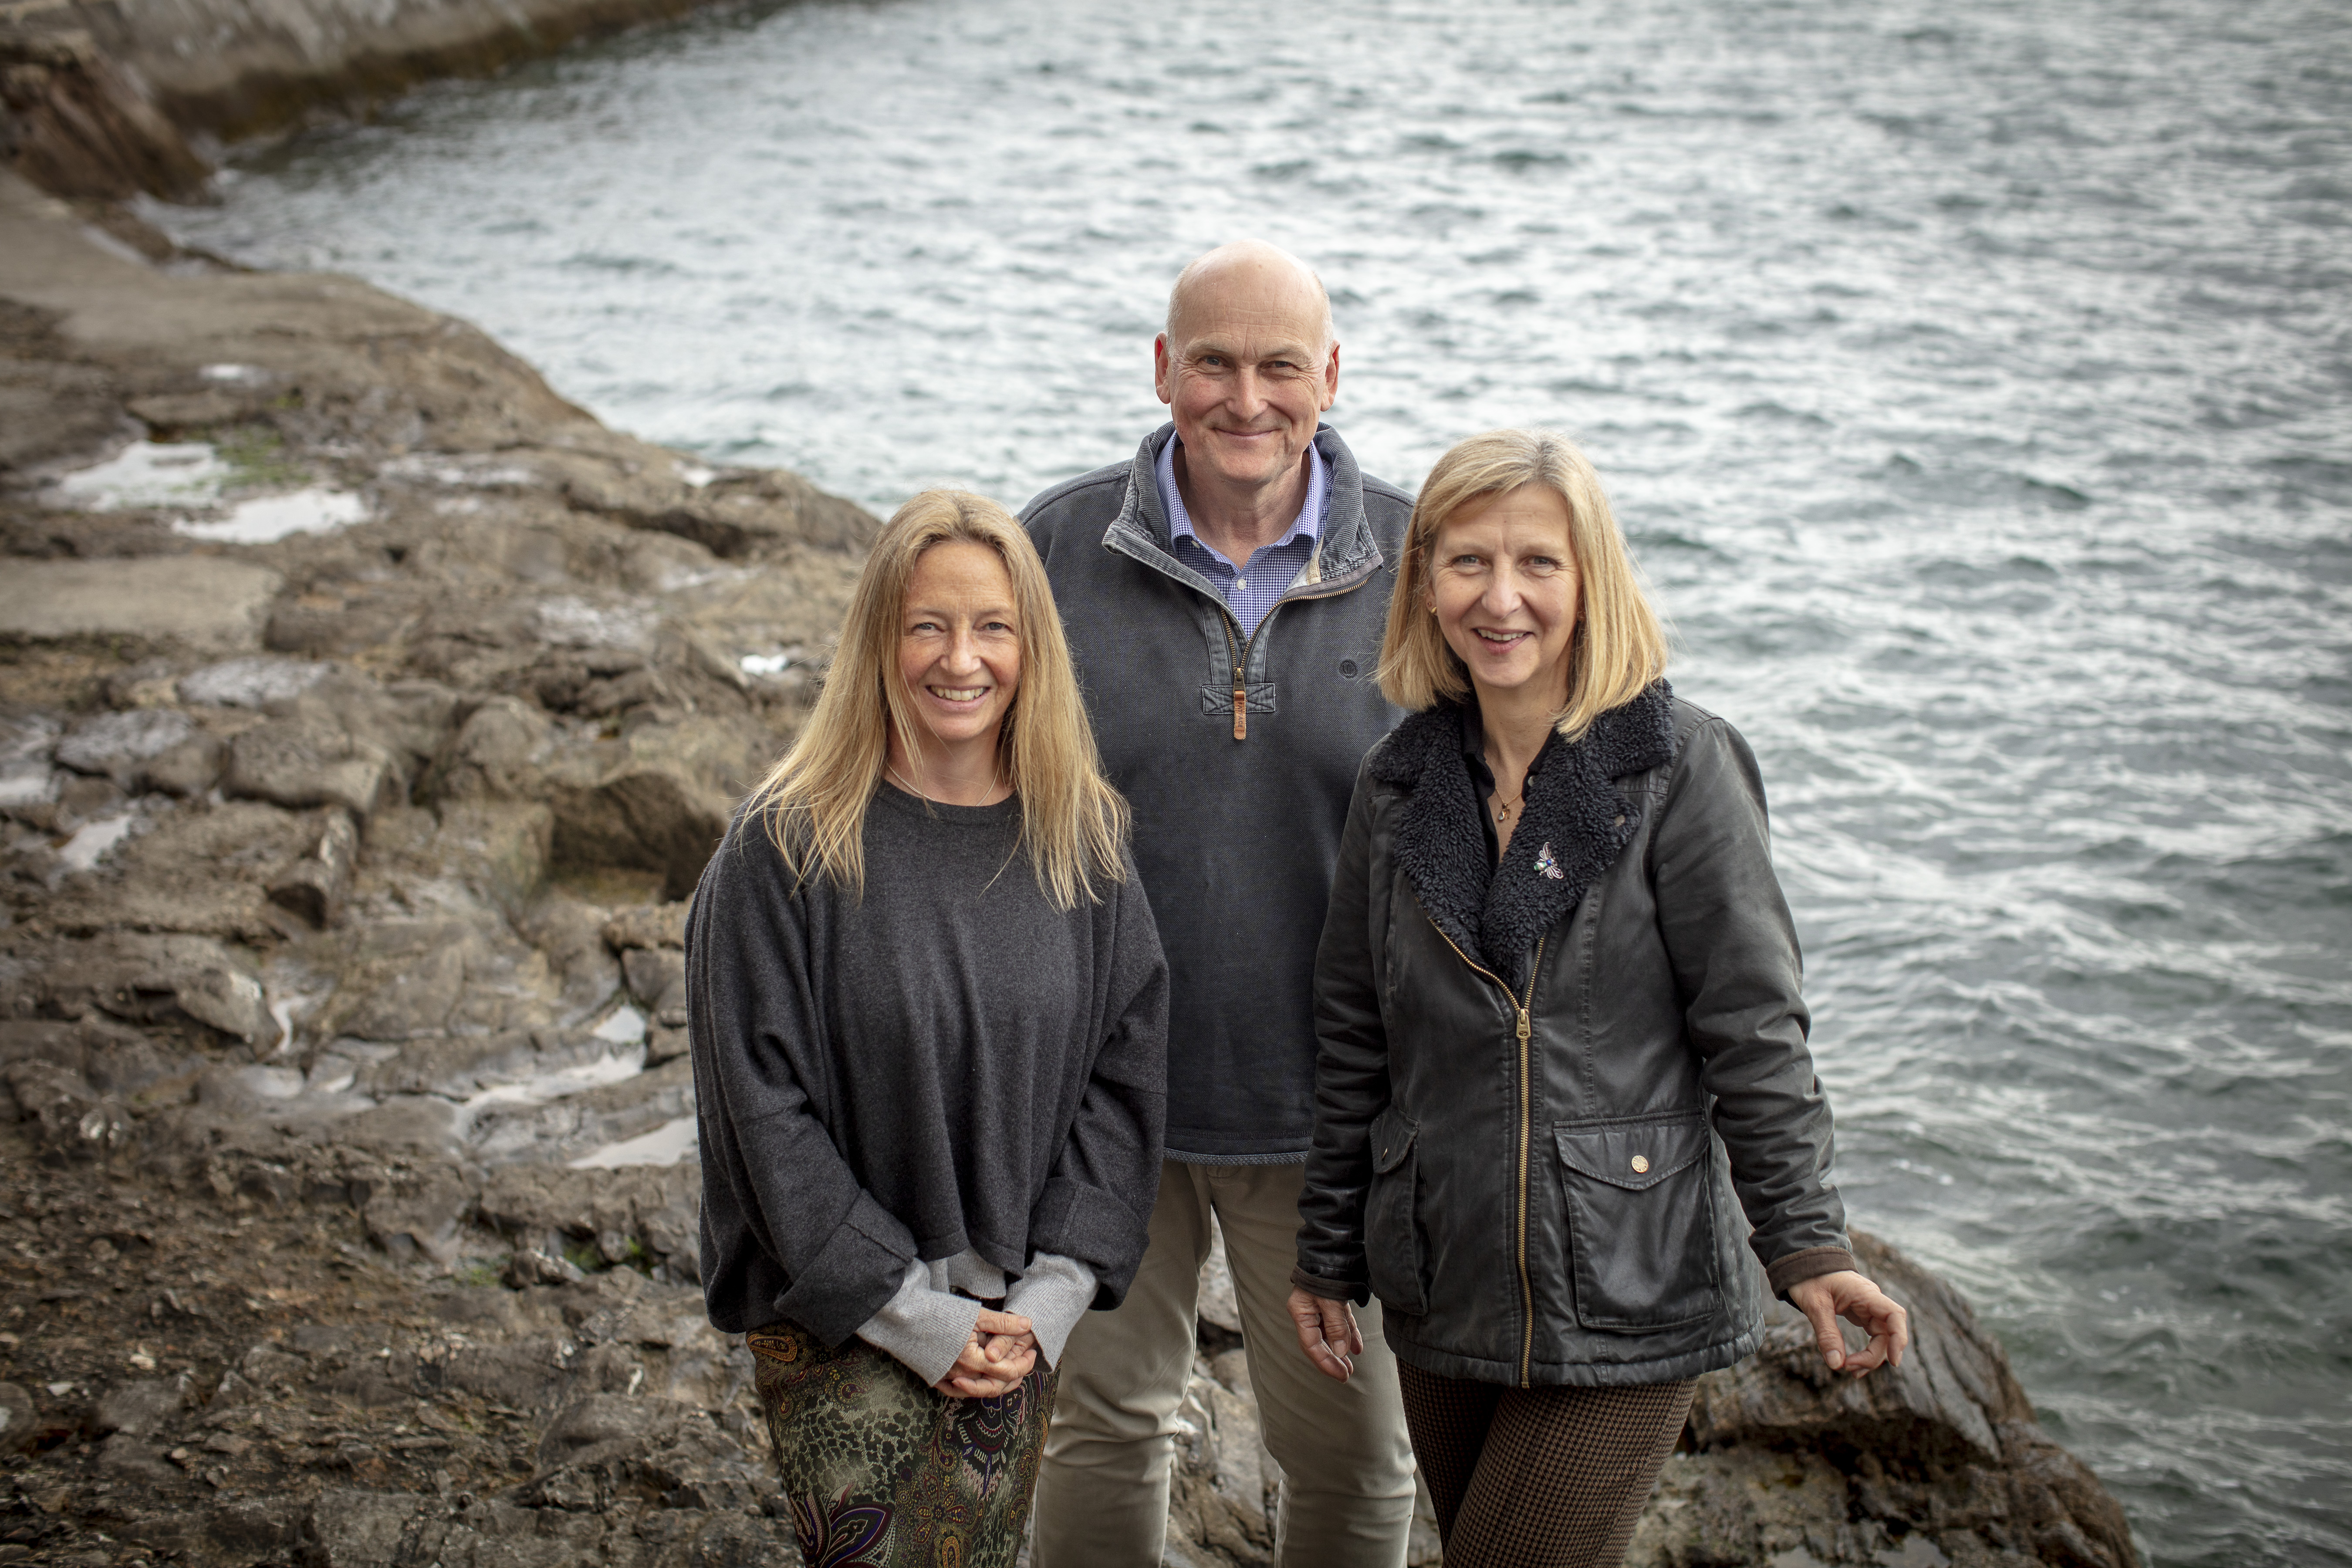  2023 Blue Planet Prize winners (l-r) Prof Pennie Lindeque (Plymouth Marine Laboratory), Prof Richard Thompson (University of Plymouth) and Prof Tamara Galloway (University of Exeter)